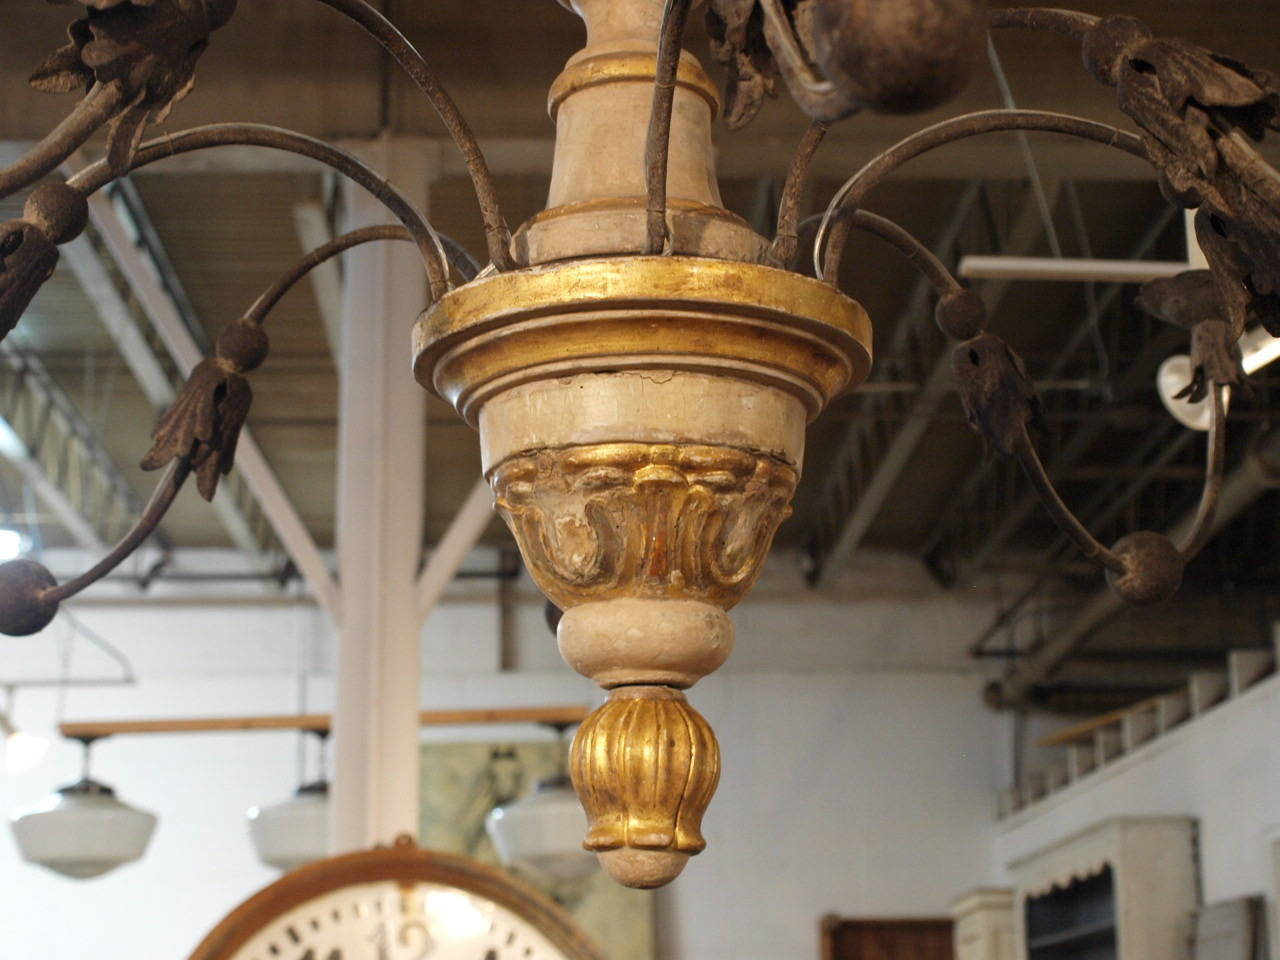 A very lovely 18th century eight-light chandelier from Northern Italy. This beautiful chandelier is made from lacquered and gilt carved wood with elegantly forged iron arms. The elegant simplicity gives this chandelier a very light and refreshing